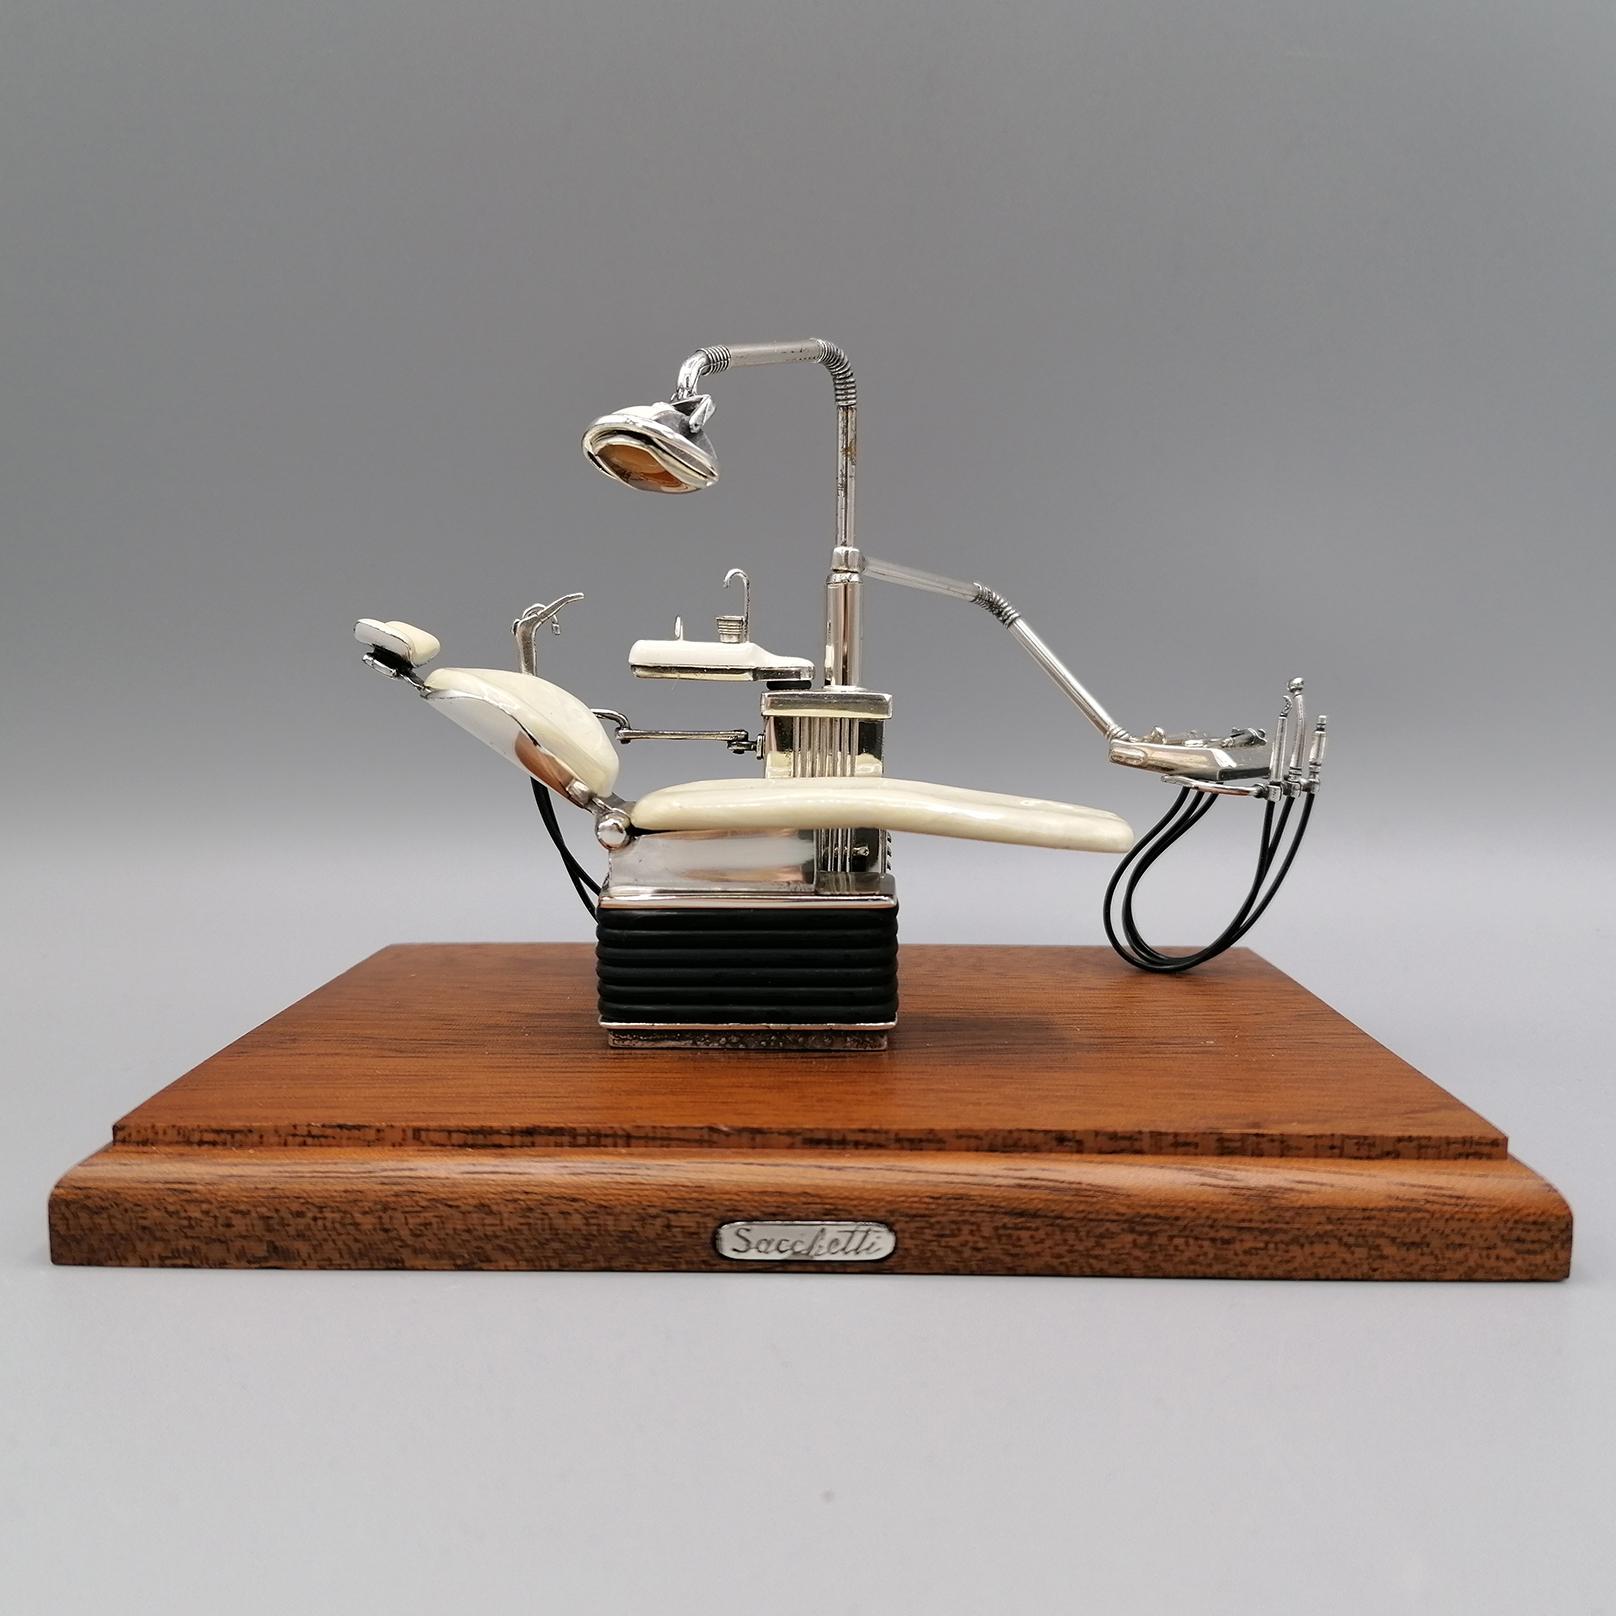 Miniature dentist station in solid sterling silver. 
The miniature is finished in all its details, such as the various drills with their rubber cables, lamp, compressor and sink and the cup for rinsing.
Some parts have been hand-enameled in white